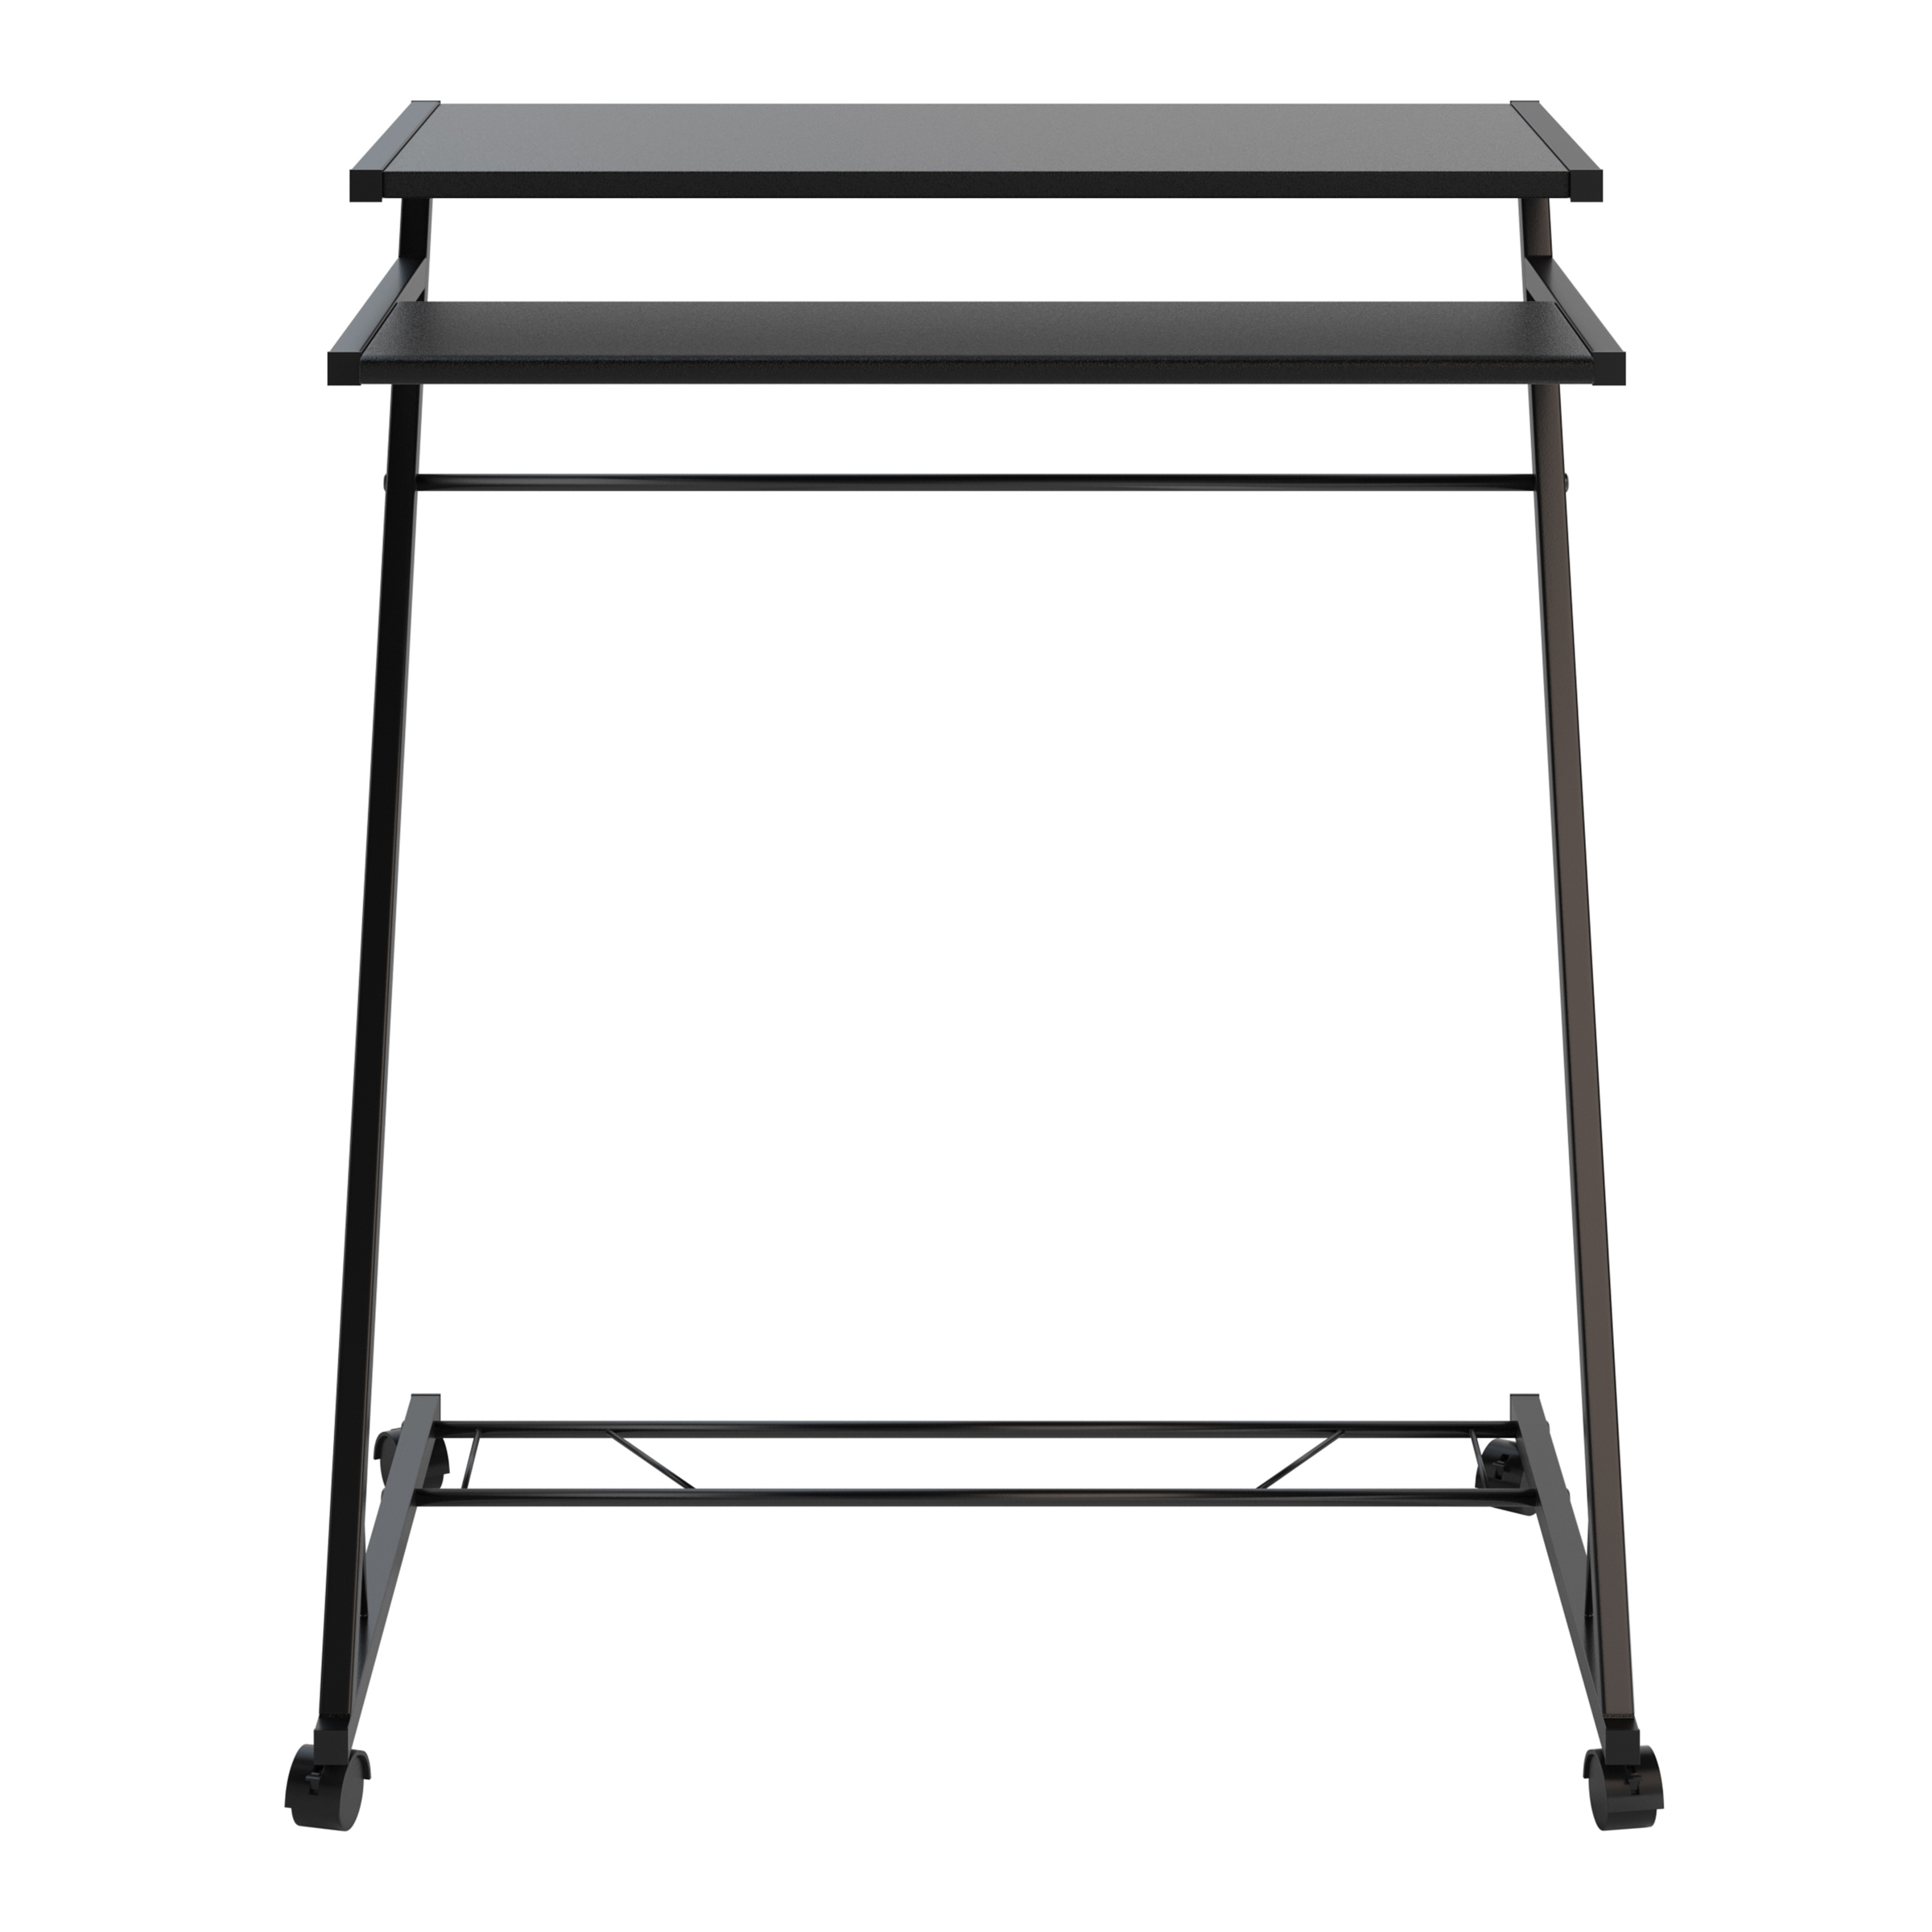 Lavish Home Rolling Laptop Cart with Casters for Mobility (Black) - image 4 of 7